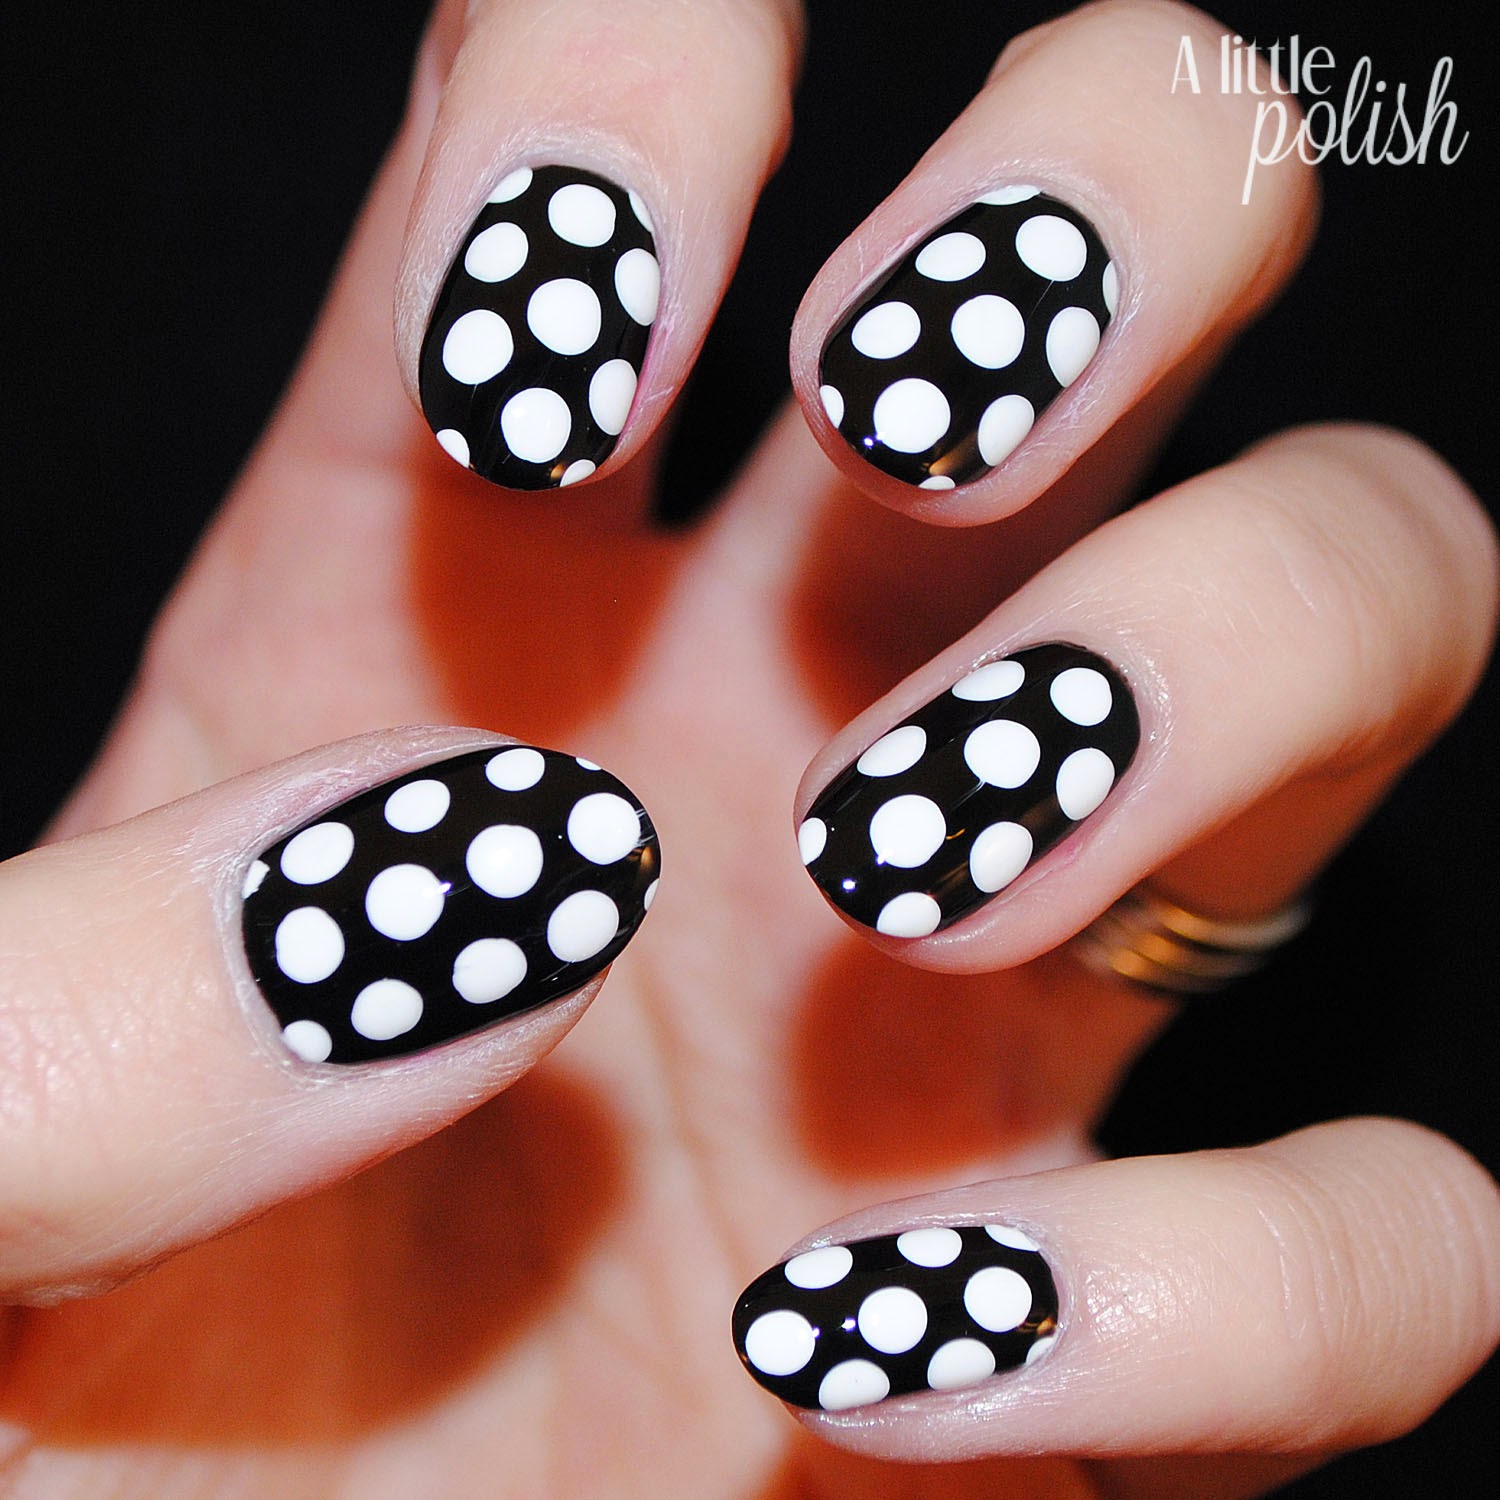 A Little Polish: The Nail Challenge Collaborative Presents - Dots - Look 1